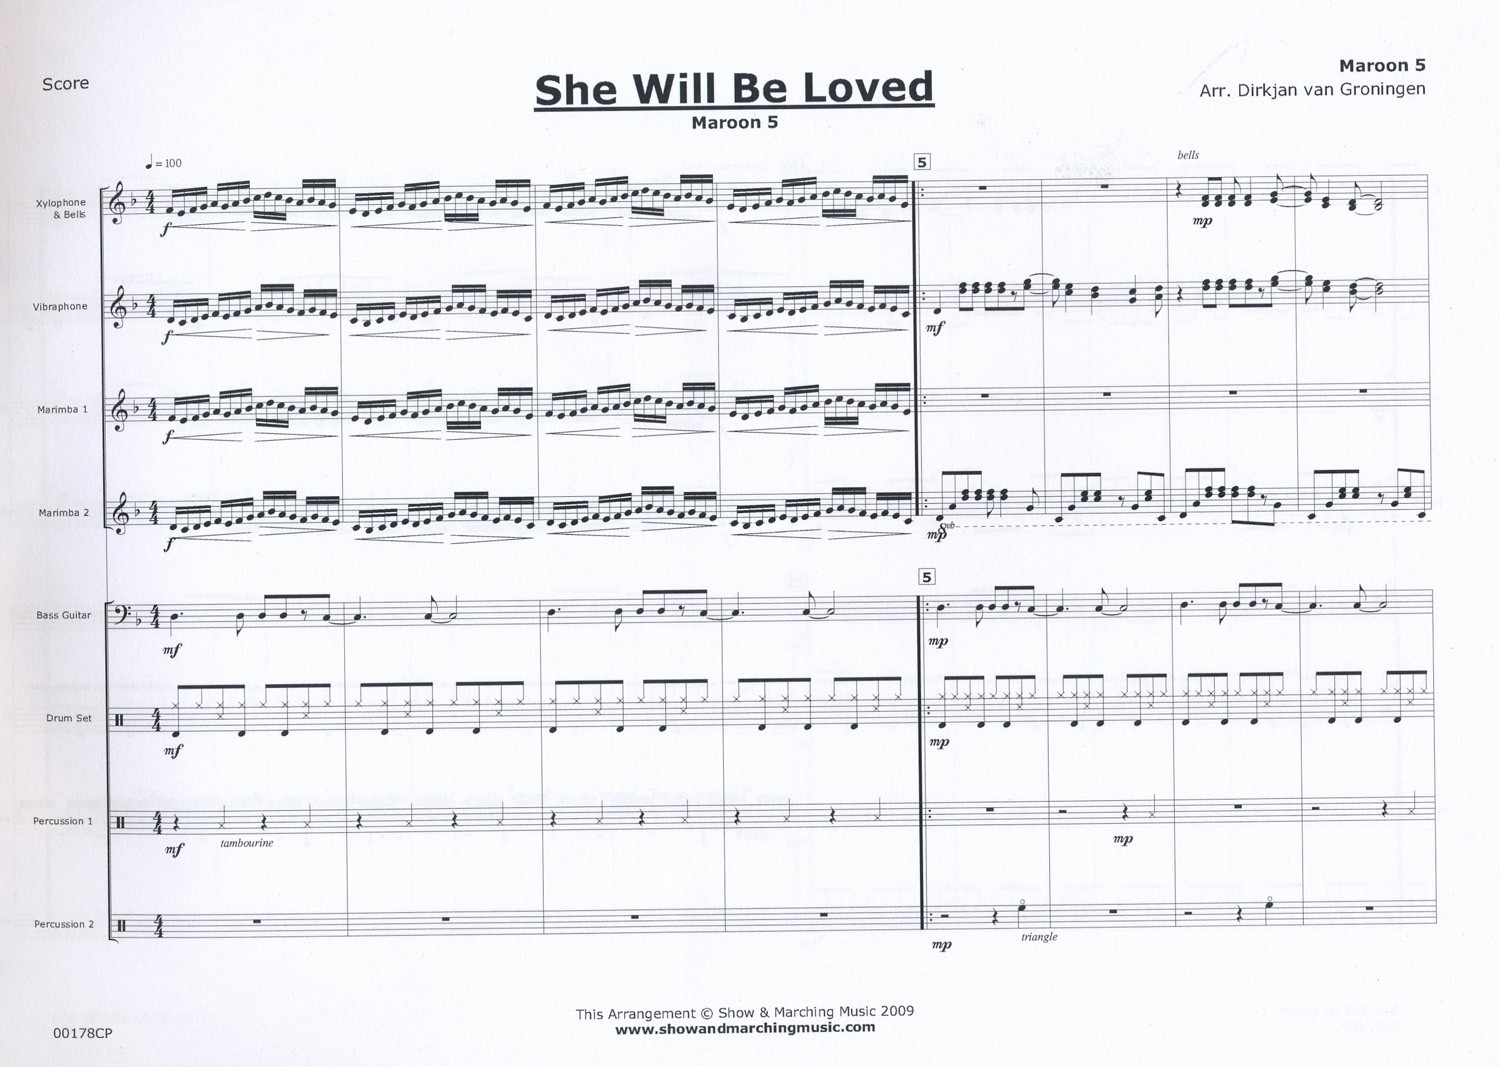 She Will Be Loved (Maroon 5)